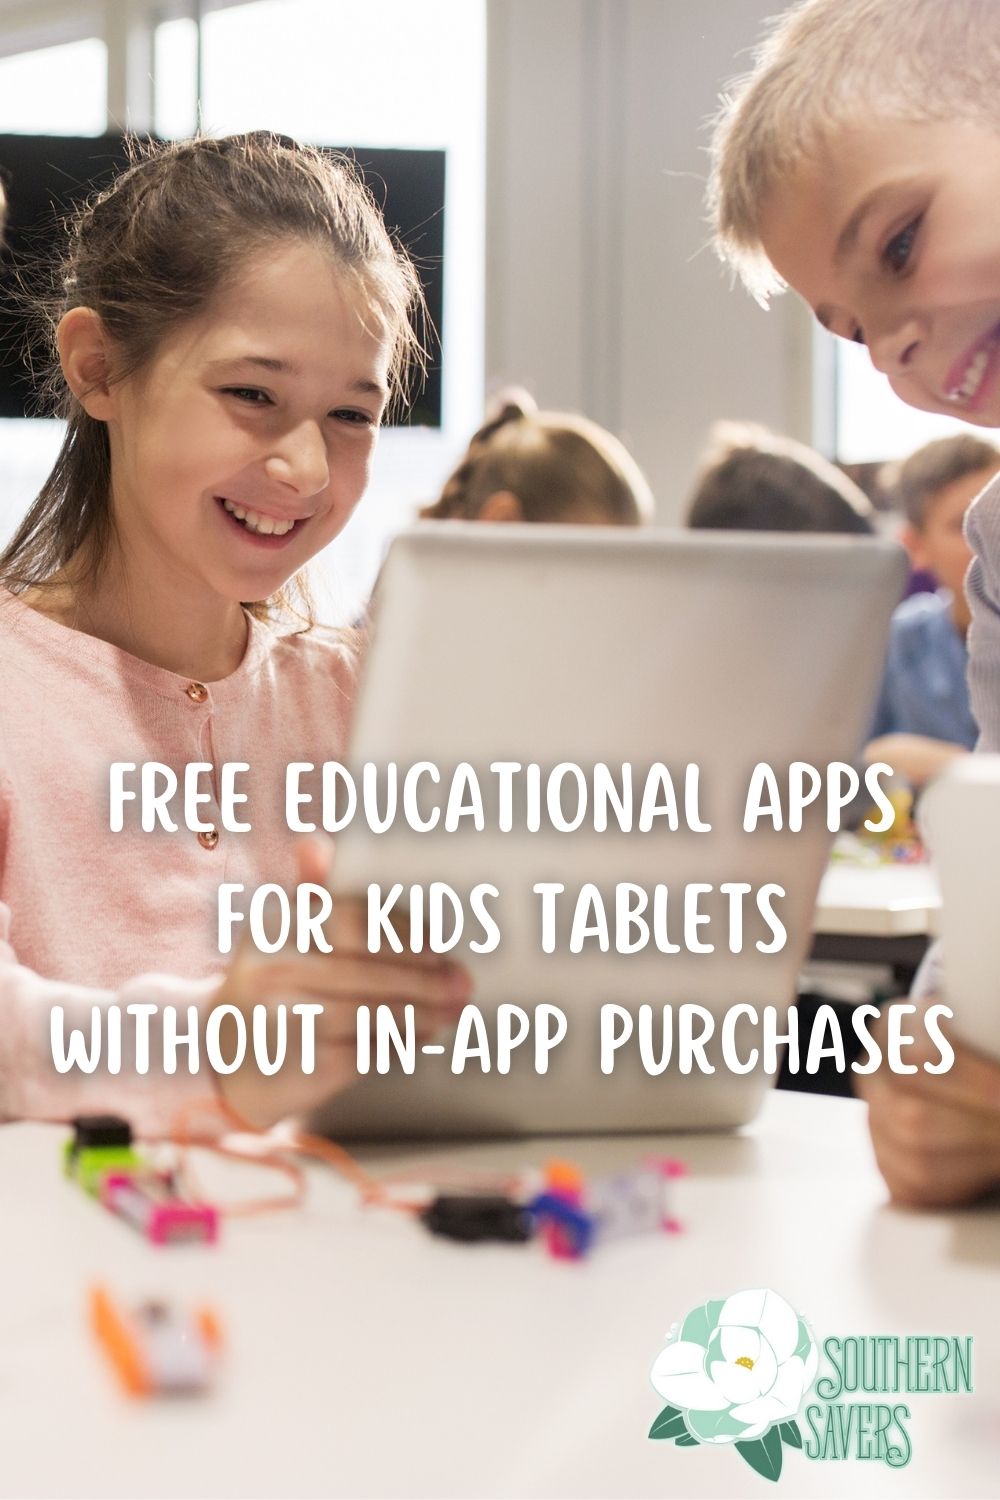 Educational apps that are truly 100% free. No in-app purchases. These apps cover a variety of subject areas from preschool to high school. 